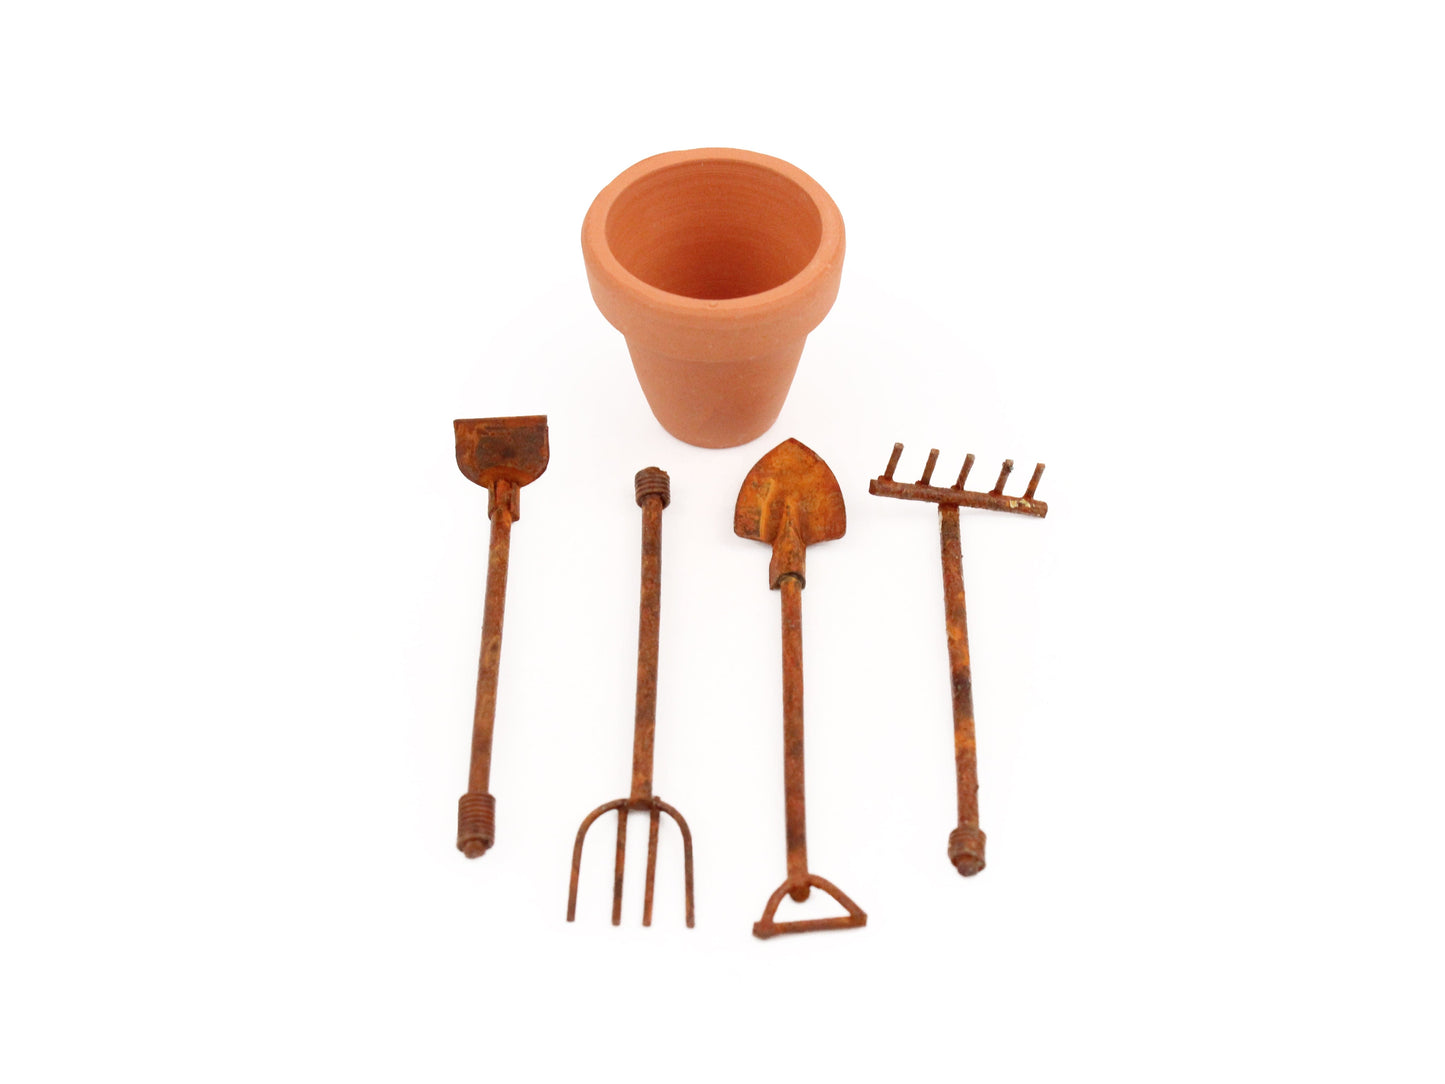 Gardening Accessory Pack - The Makerss